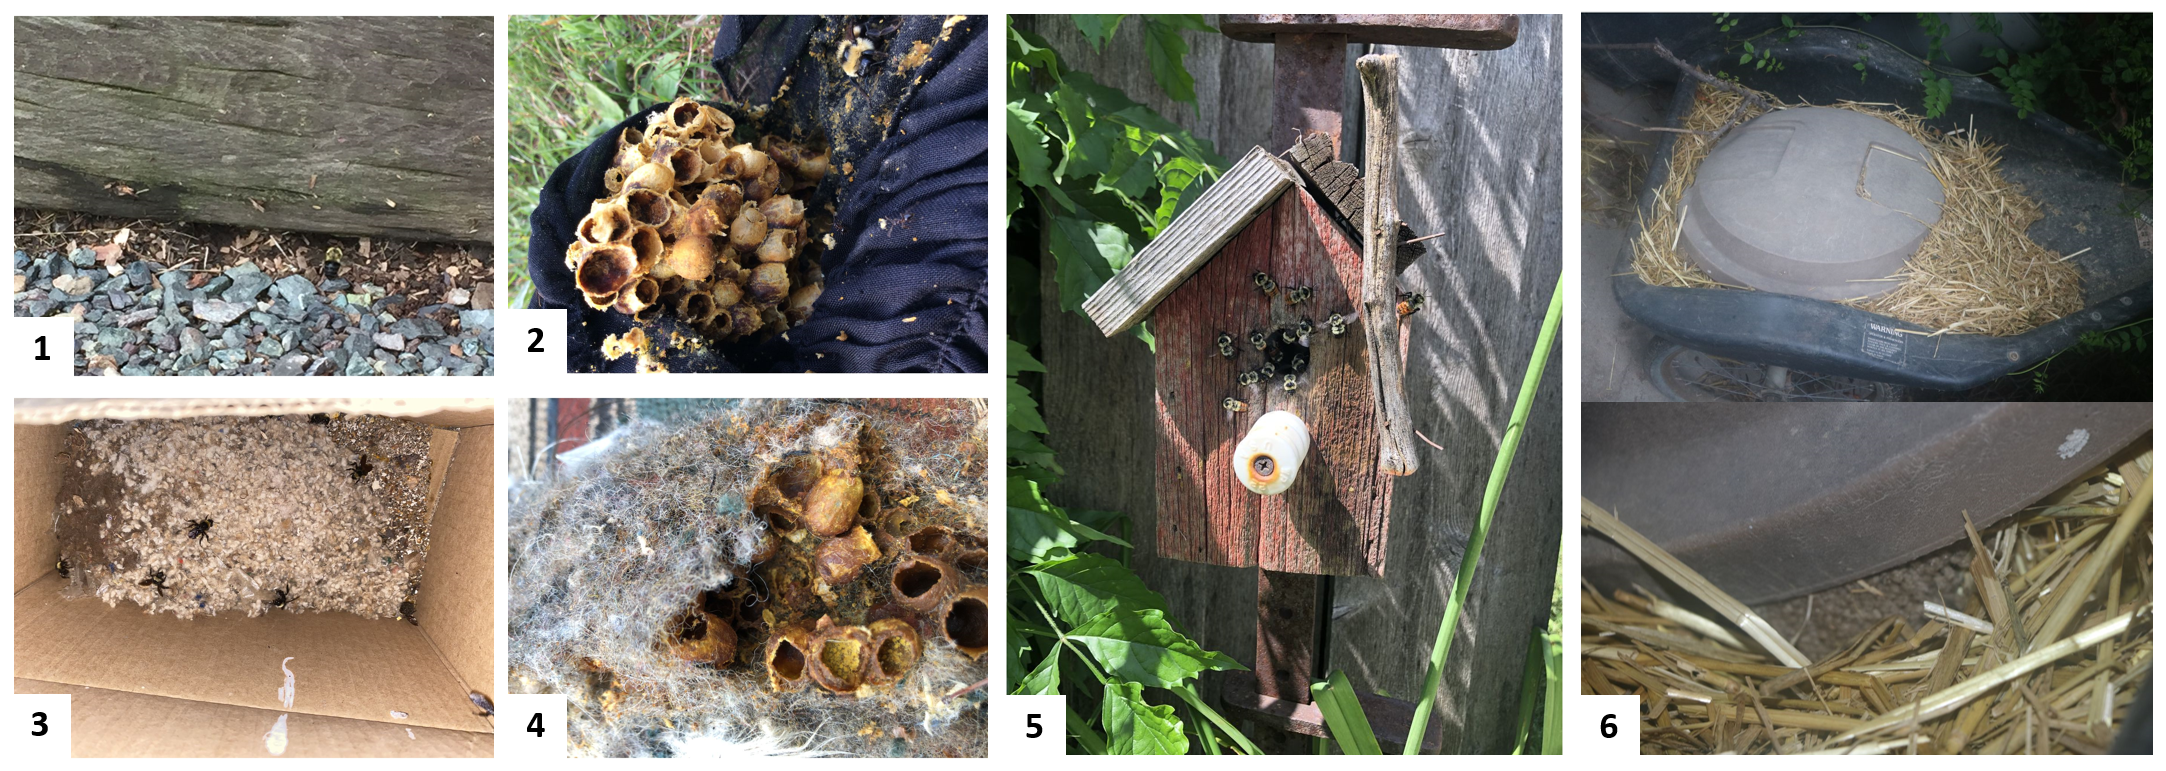 "A series of 6 images showing different human-made structures utilized by bumble bees as nesting locations, (1) under a deck, (2) in fabric stored in a shed, (3) in a cardboard box, (4) in a stored horse saddle, (5) in a birdhouse, and (6) in a cart of dried hay under a plastic lid"